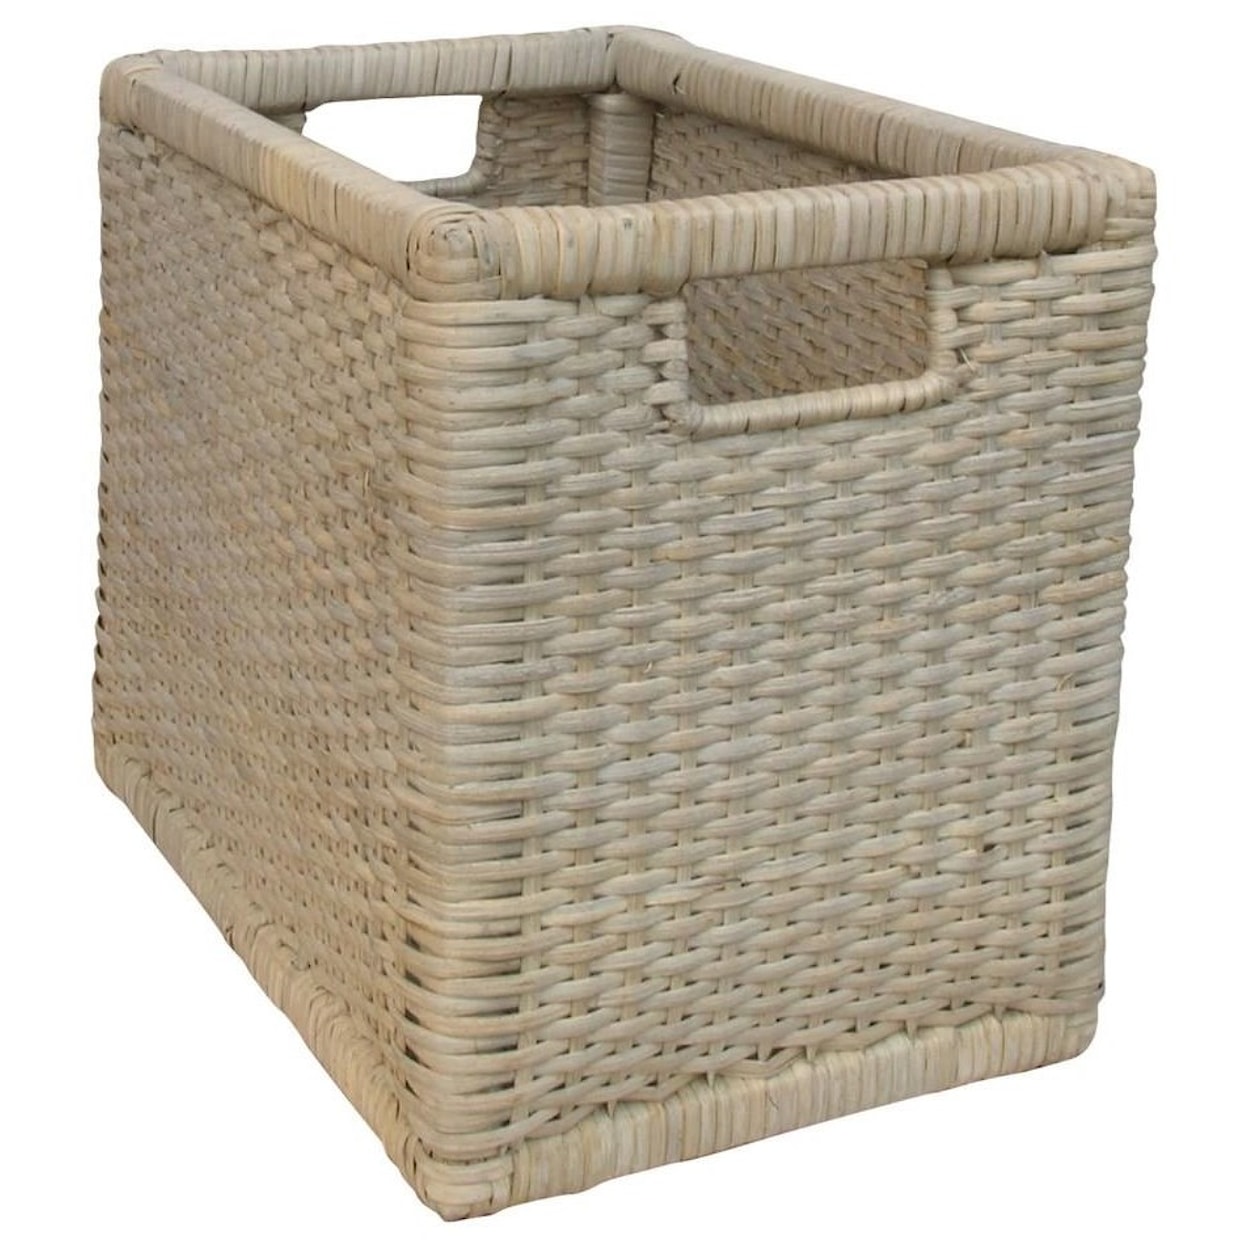 Trade Winds Furniture Accents and Accessories Cane Storage Basket